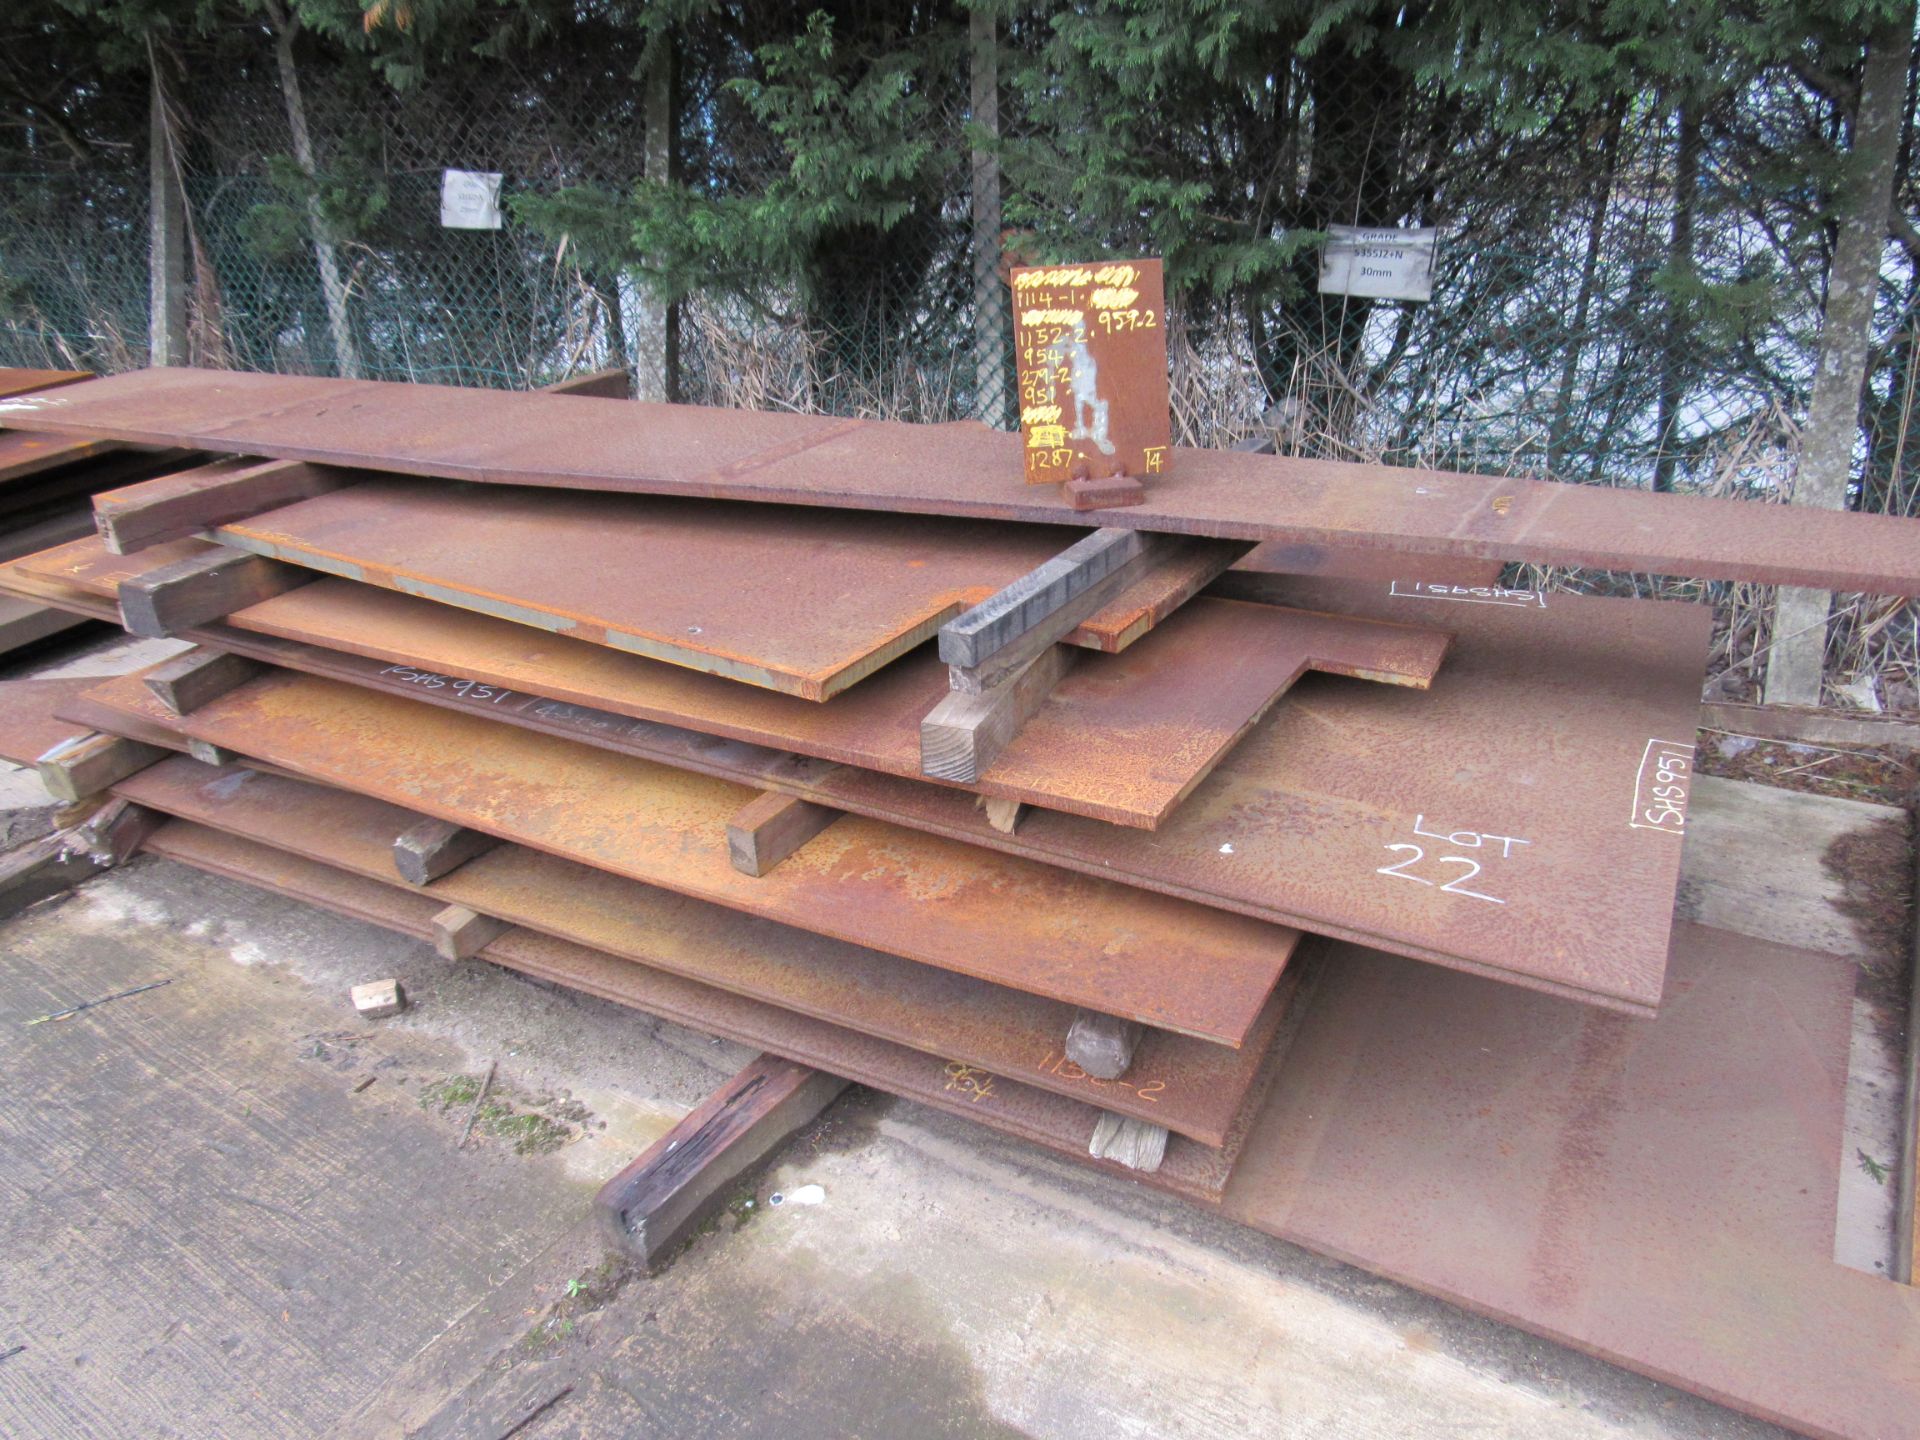 Assortment of Steel Stock, to 3 x Stacks, as lotted (Various sizes – viewing recommended)